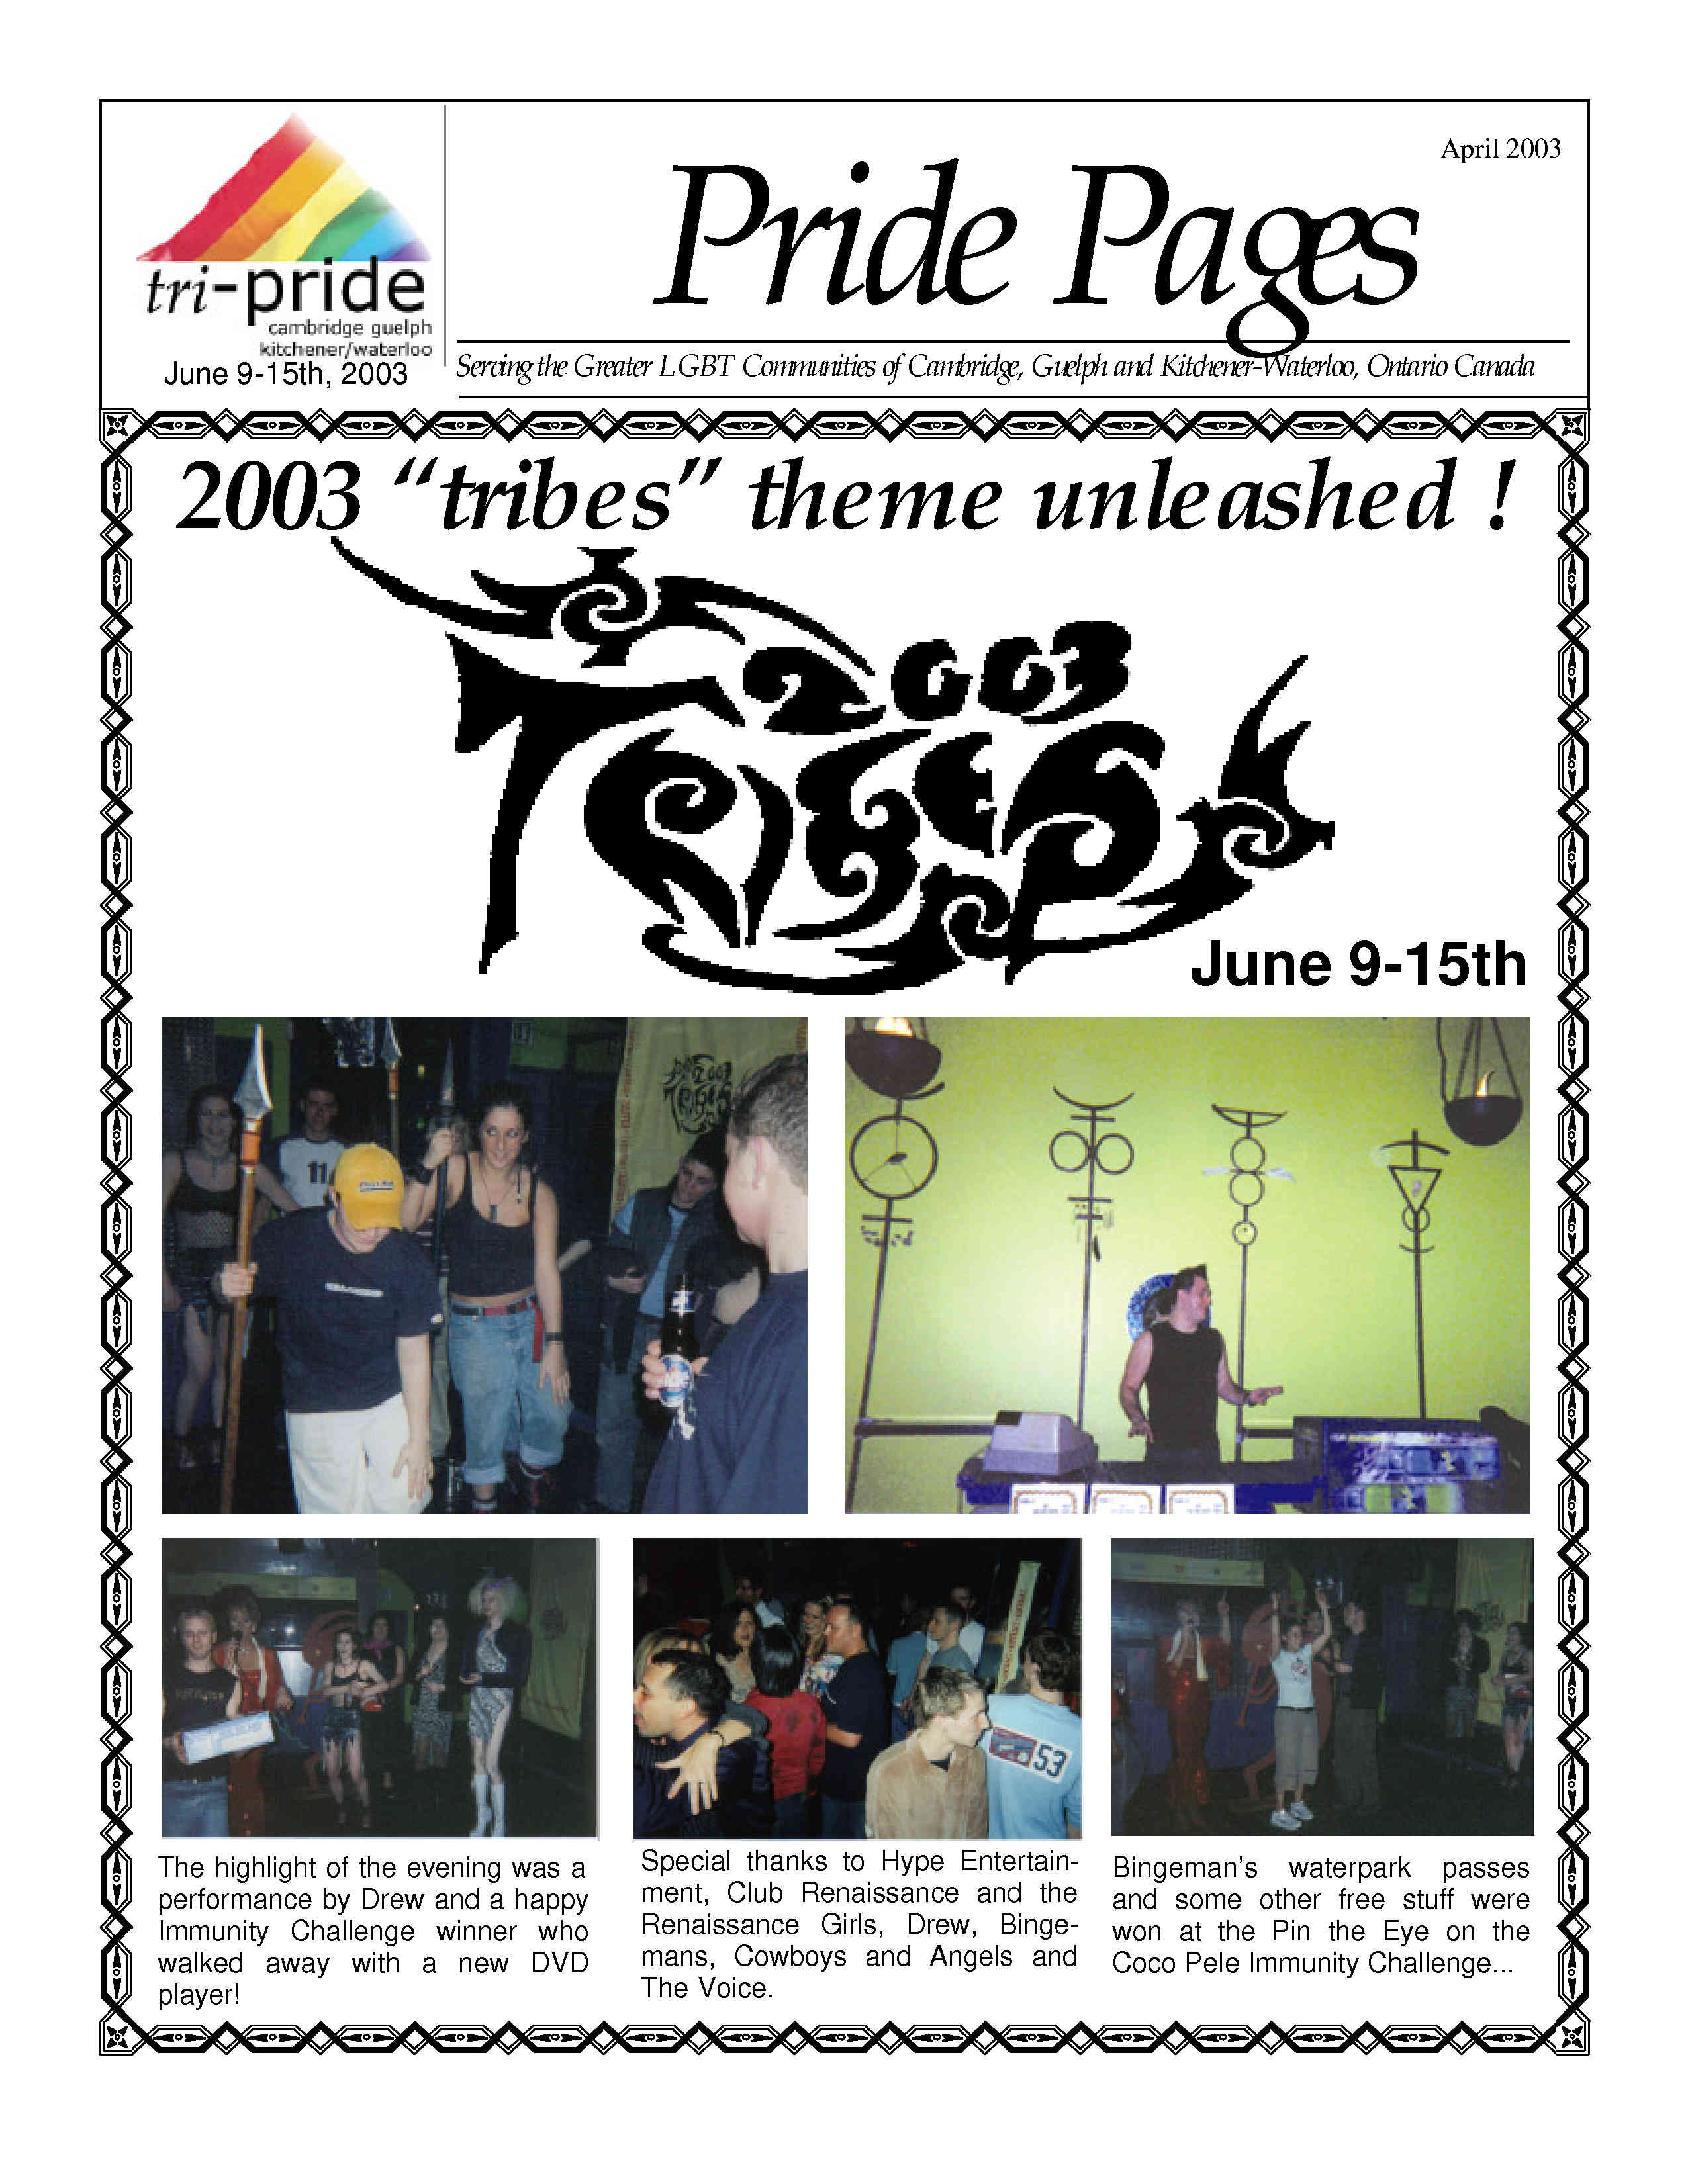 Pride Pages 2003-04 p1